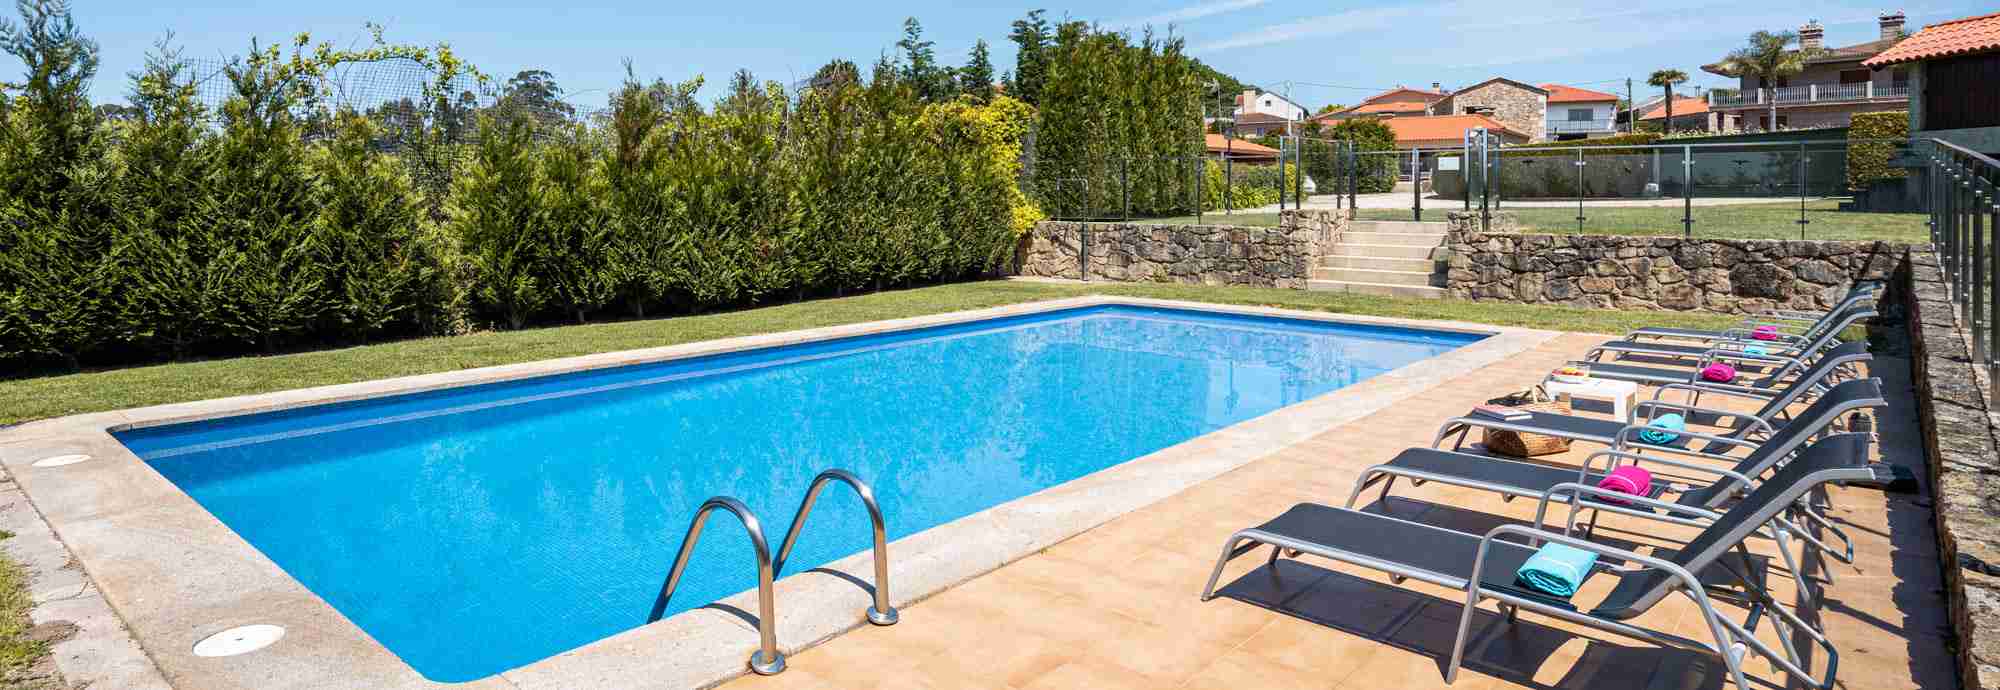 Well-put-together villa with gated pool in traditional Galician hamlet